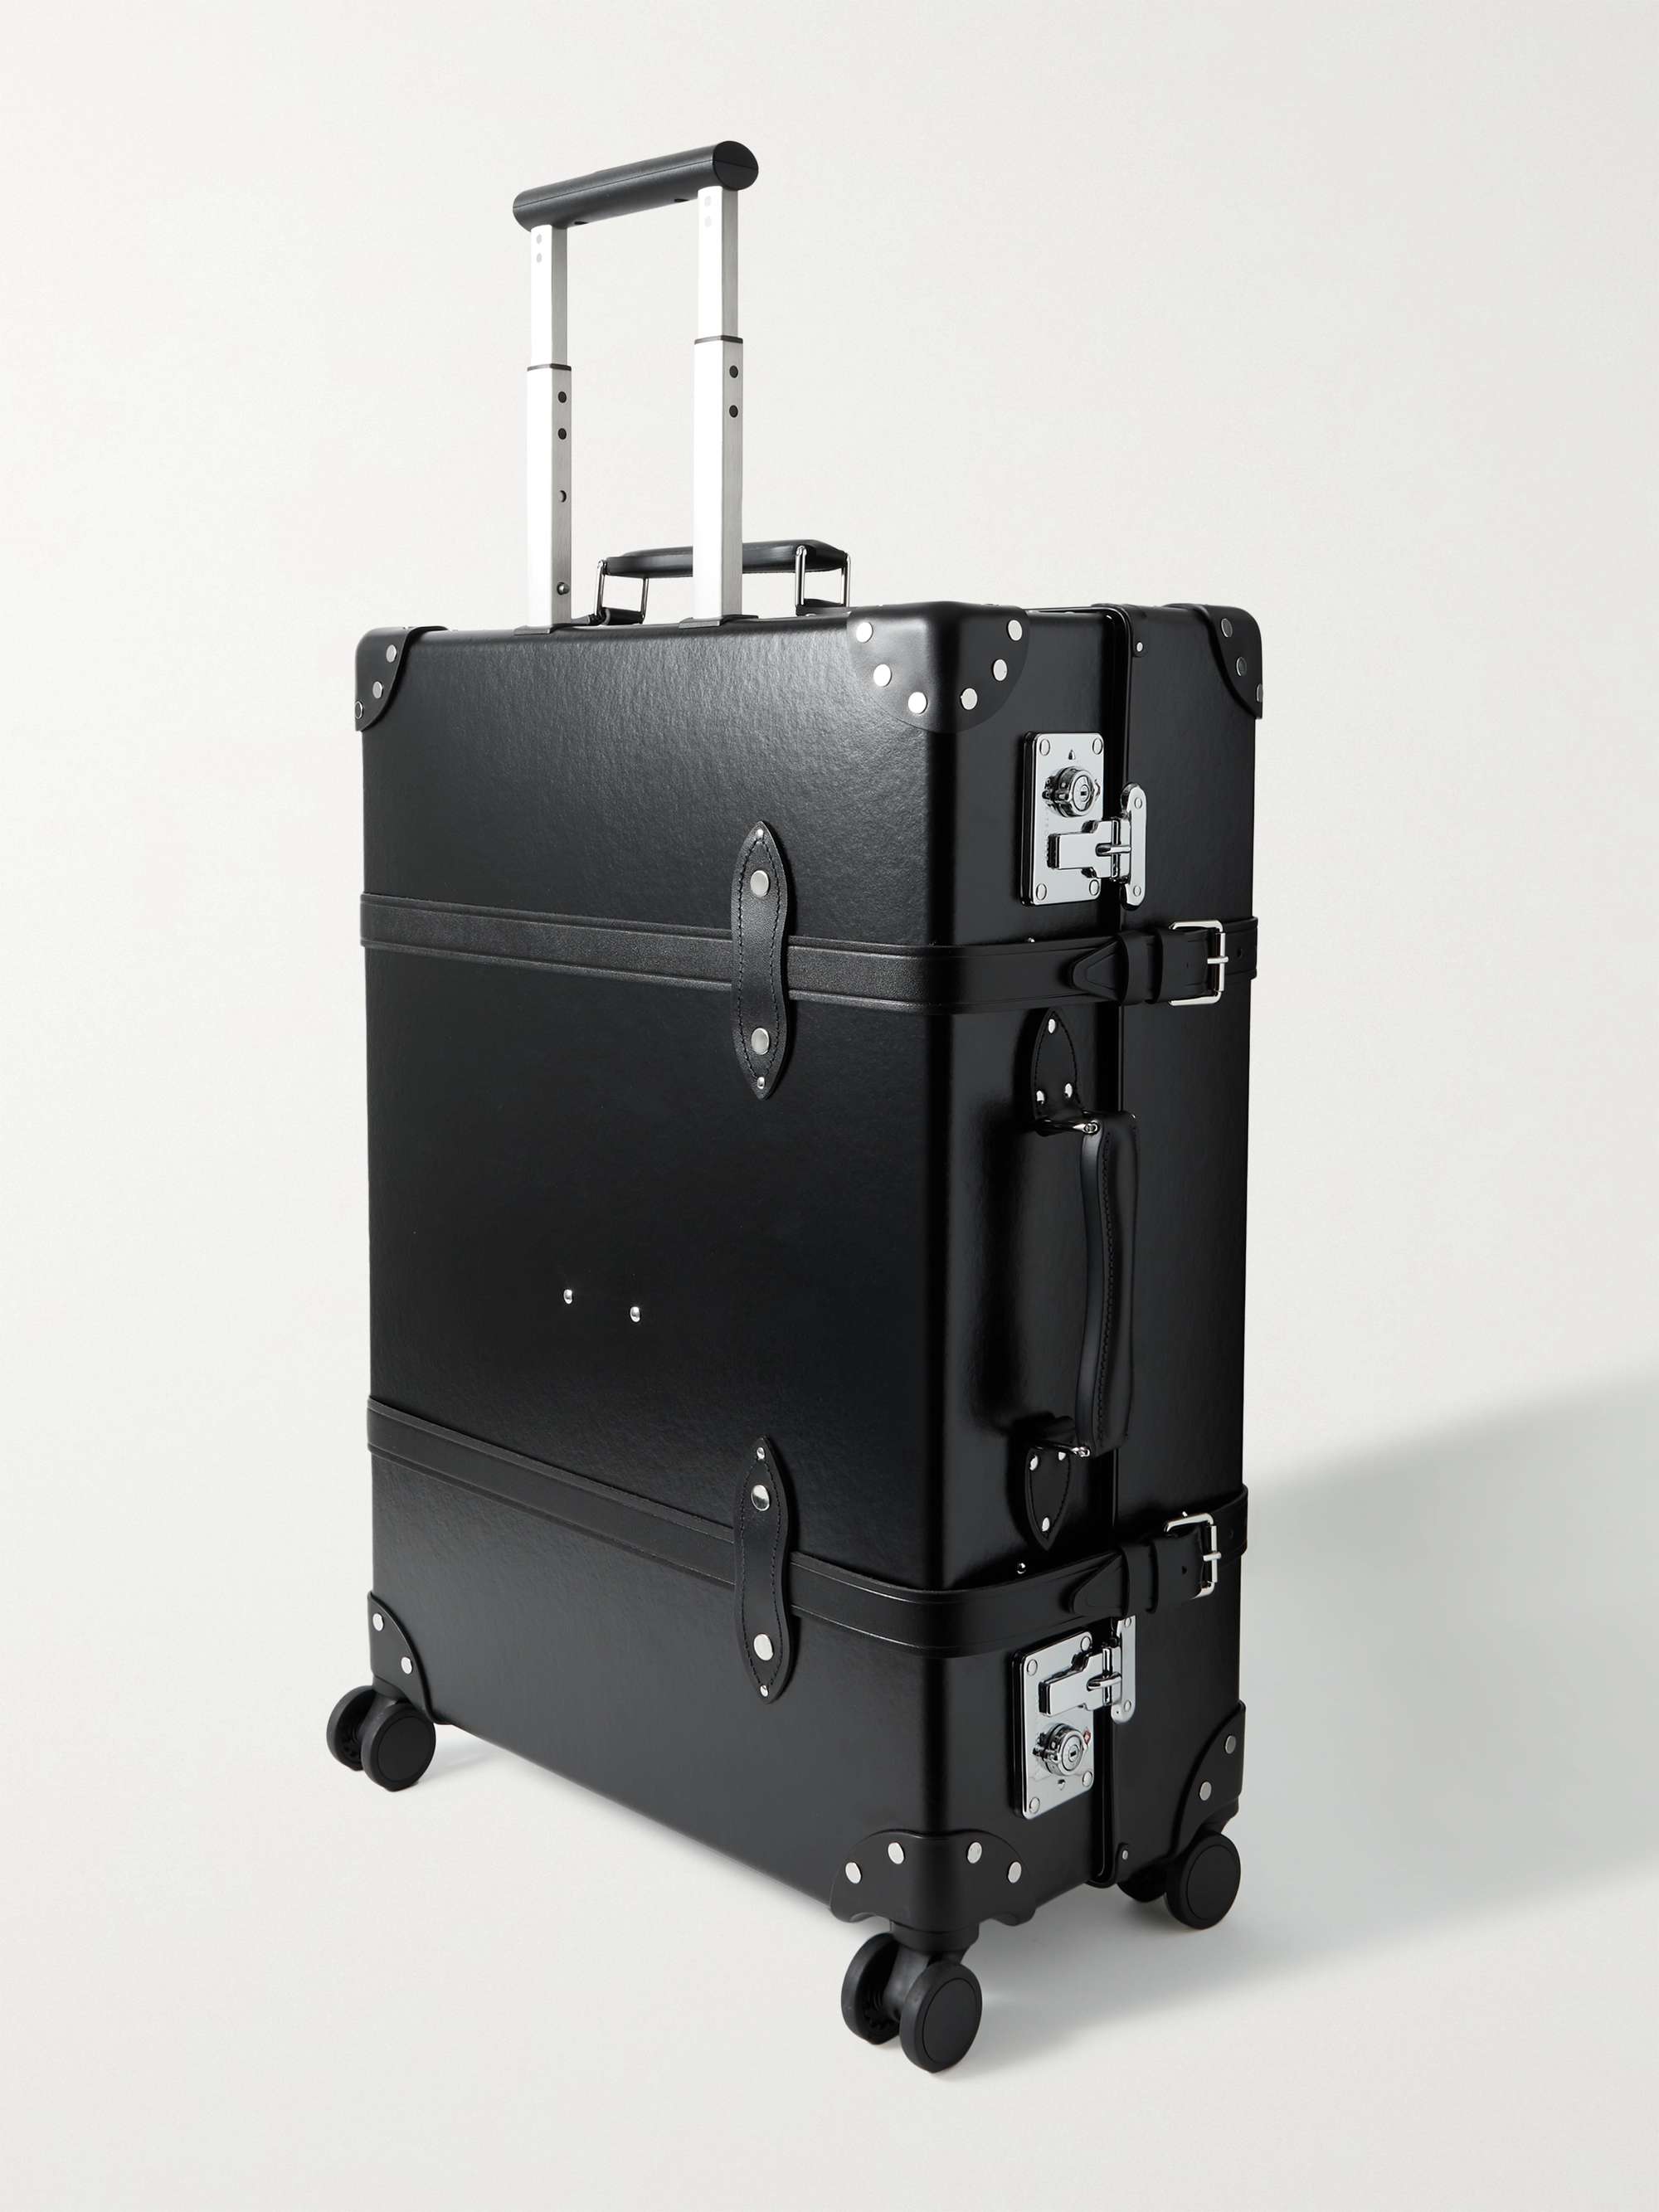 GLOBE-TROTTER Centenary 30" Leather-Trimmed Trolley Case